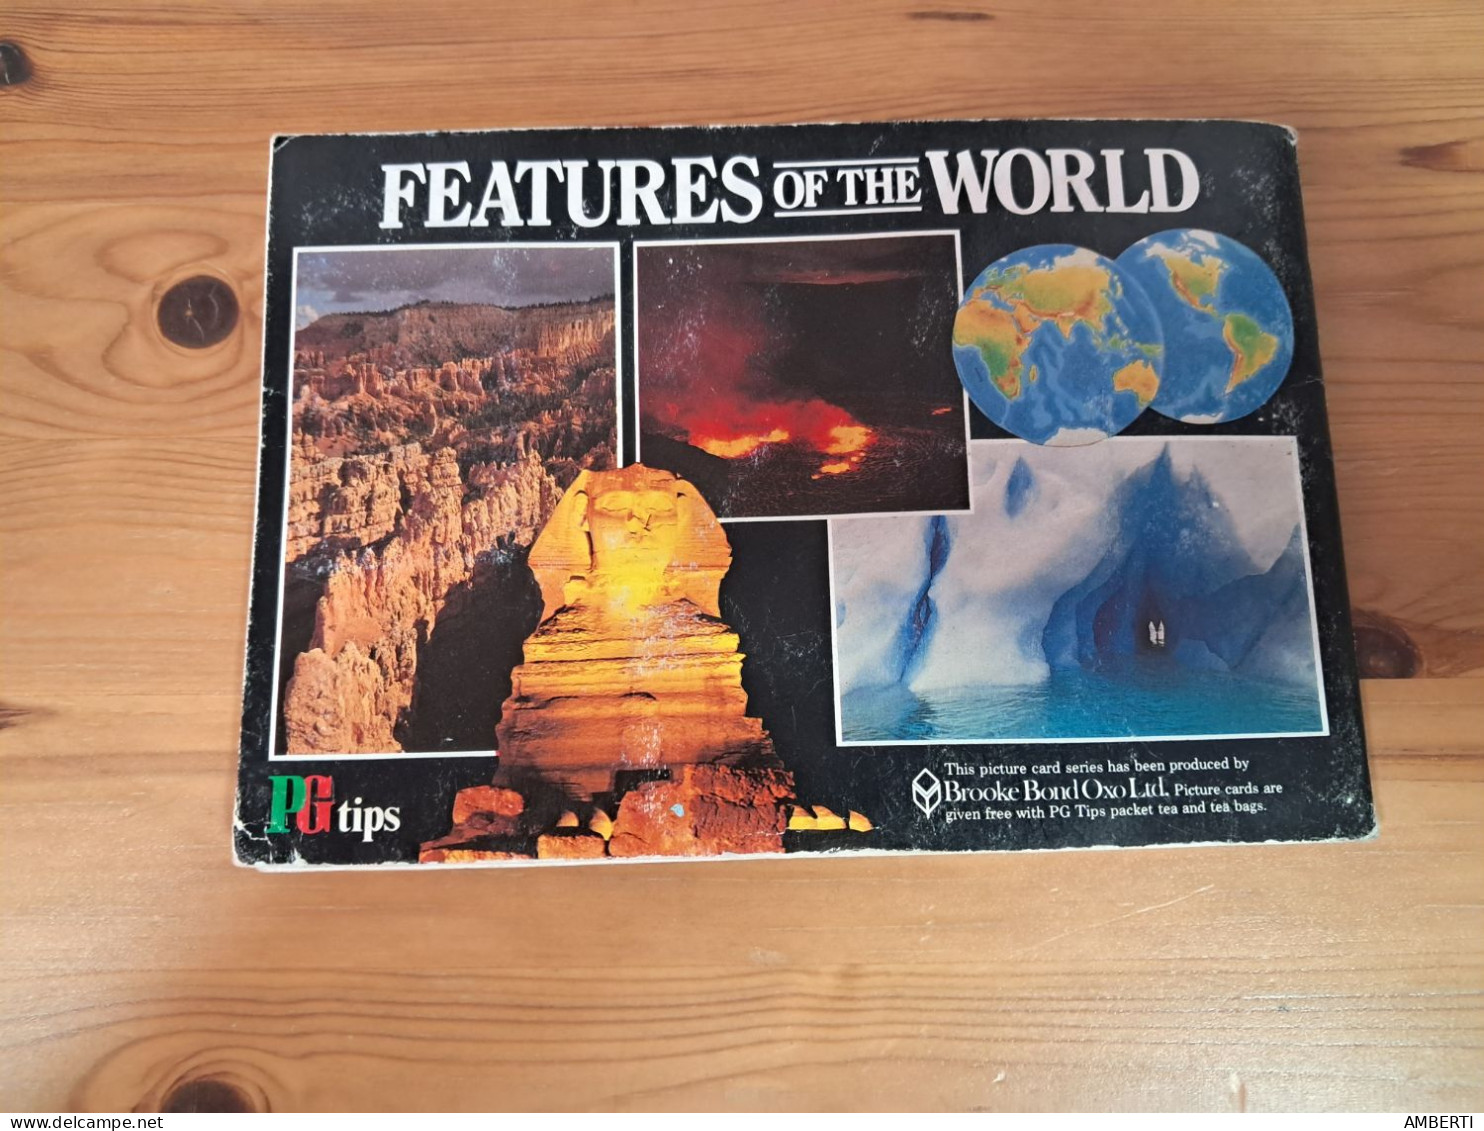 Features of the World